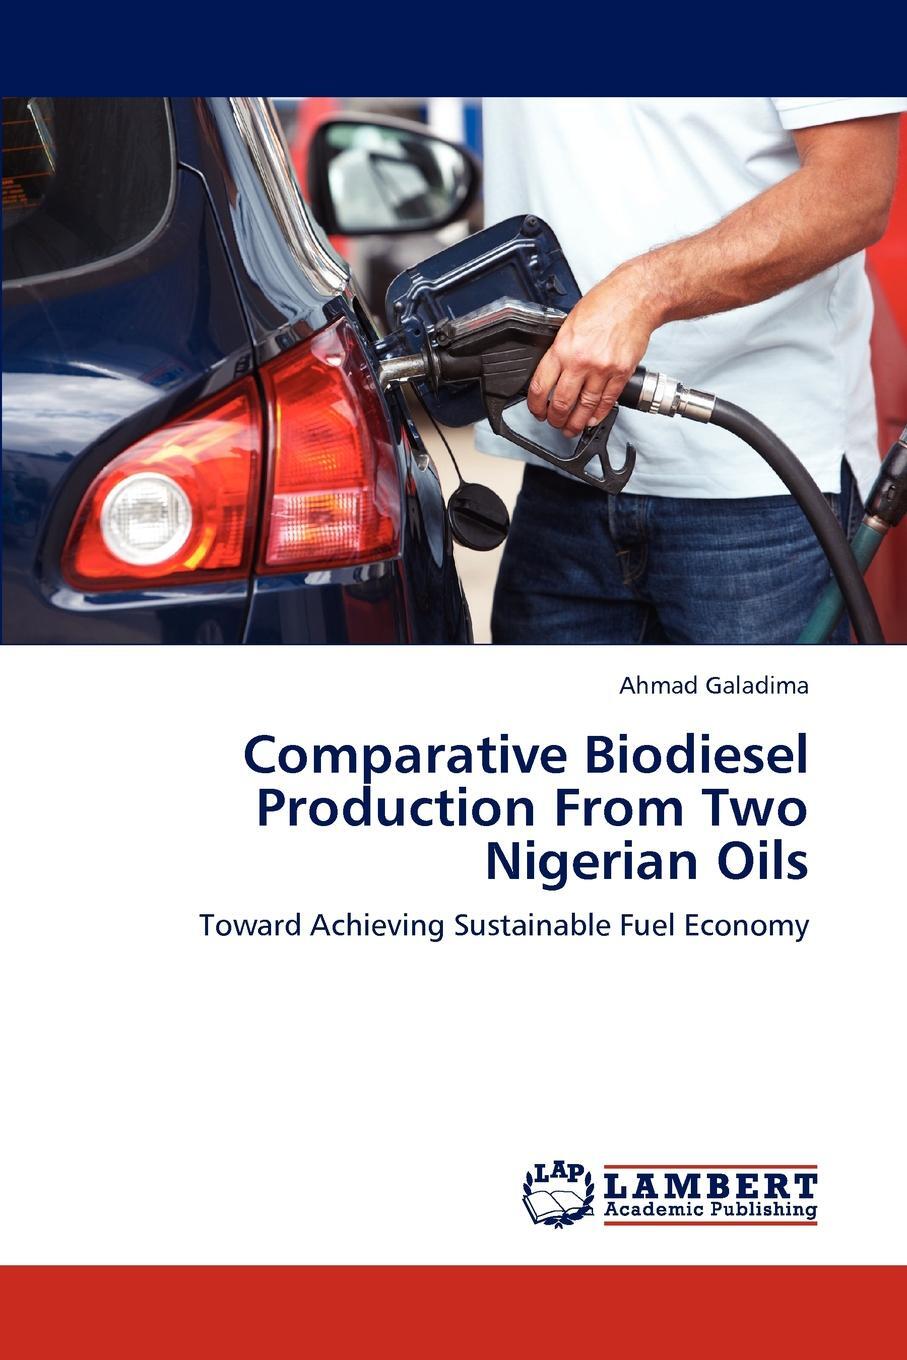 фото Comparative Biodiesel Production From Two Nigerian Oils